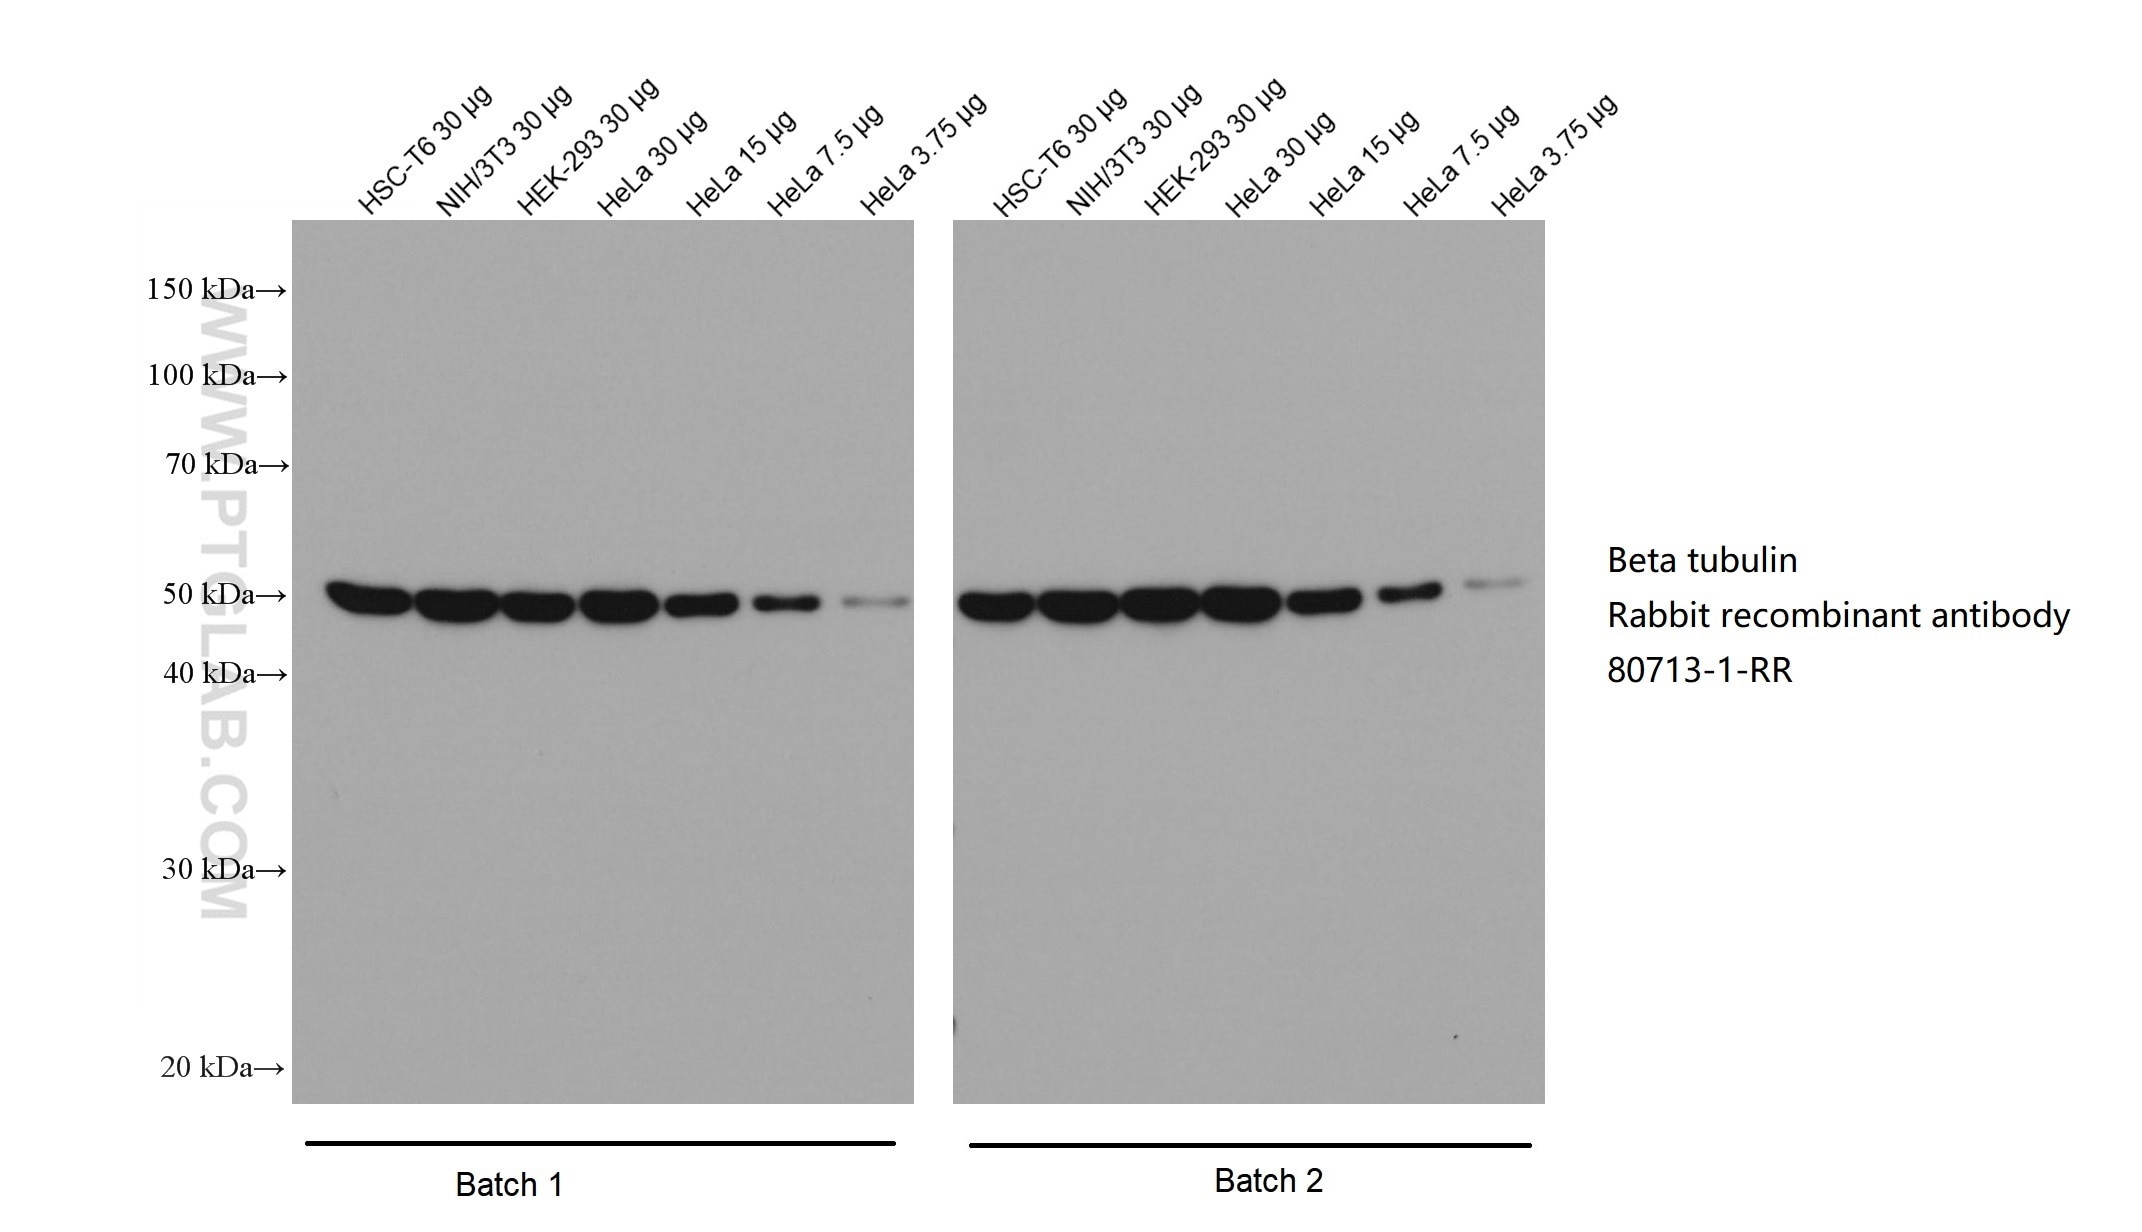 Various lysates were subjected to SDS-PAGE followed by western blot with Beta tubulin rabbit recombinant antibody (80713-1-RR) at dilution of 1:20000. Two batches of Multi-rAb HRP-Goat Anti-Rabbit Recombinant Secondary Antibody (H+L) (RGAR001) were used at 1:20000 for detection.